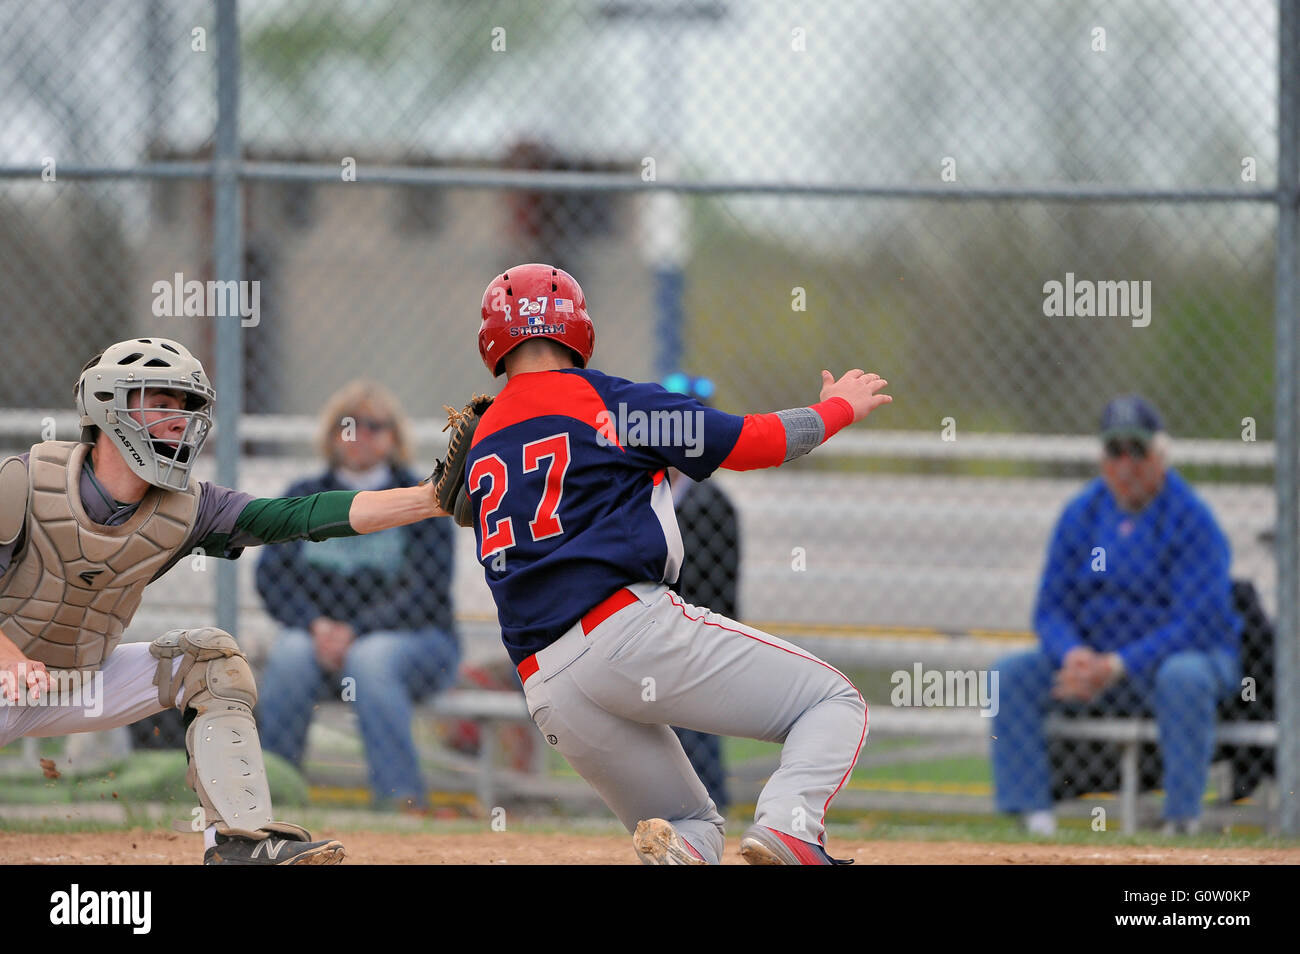 While trying to score, a high school player is tagged out by the opposing catcher. USA. Stock Photo